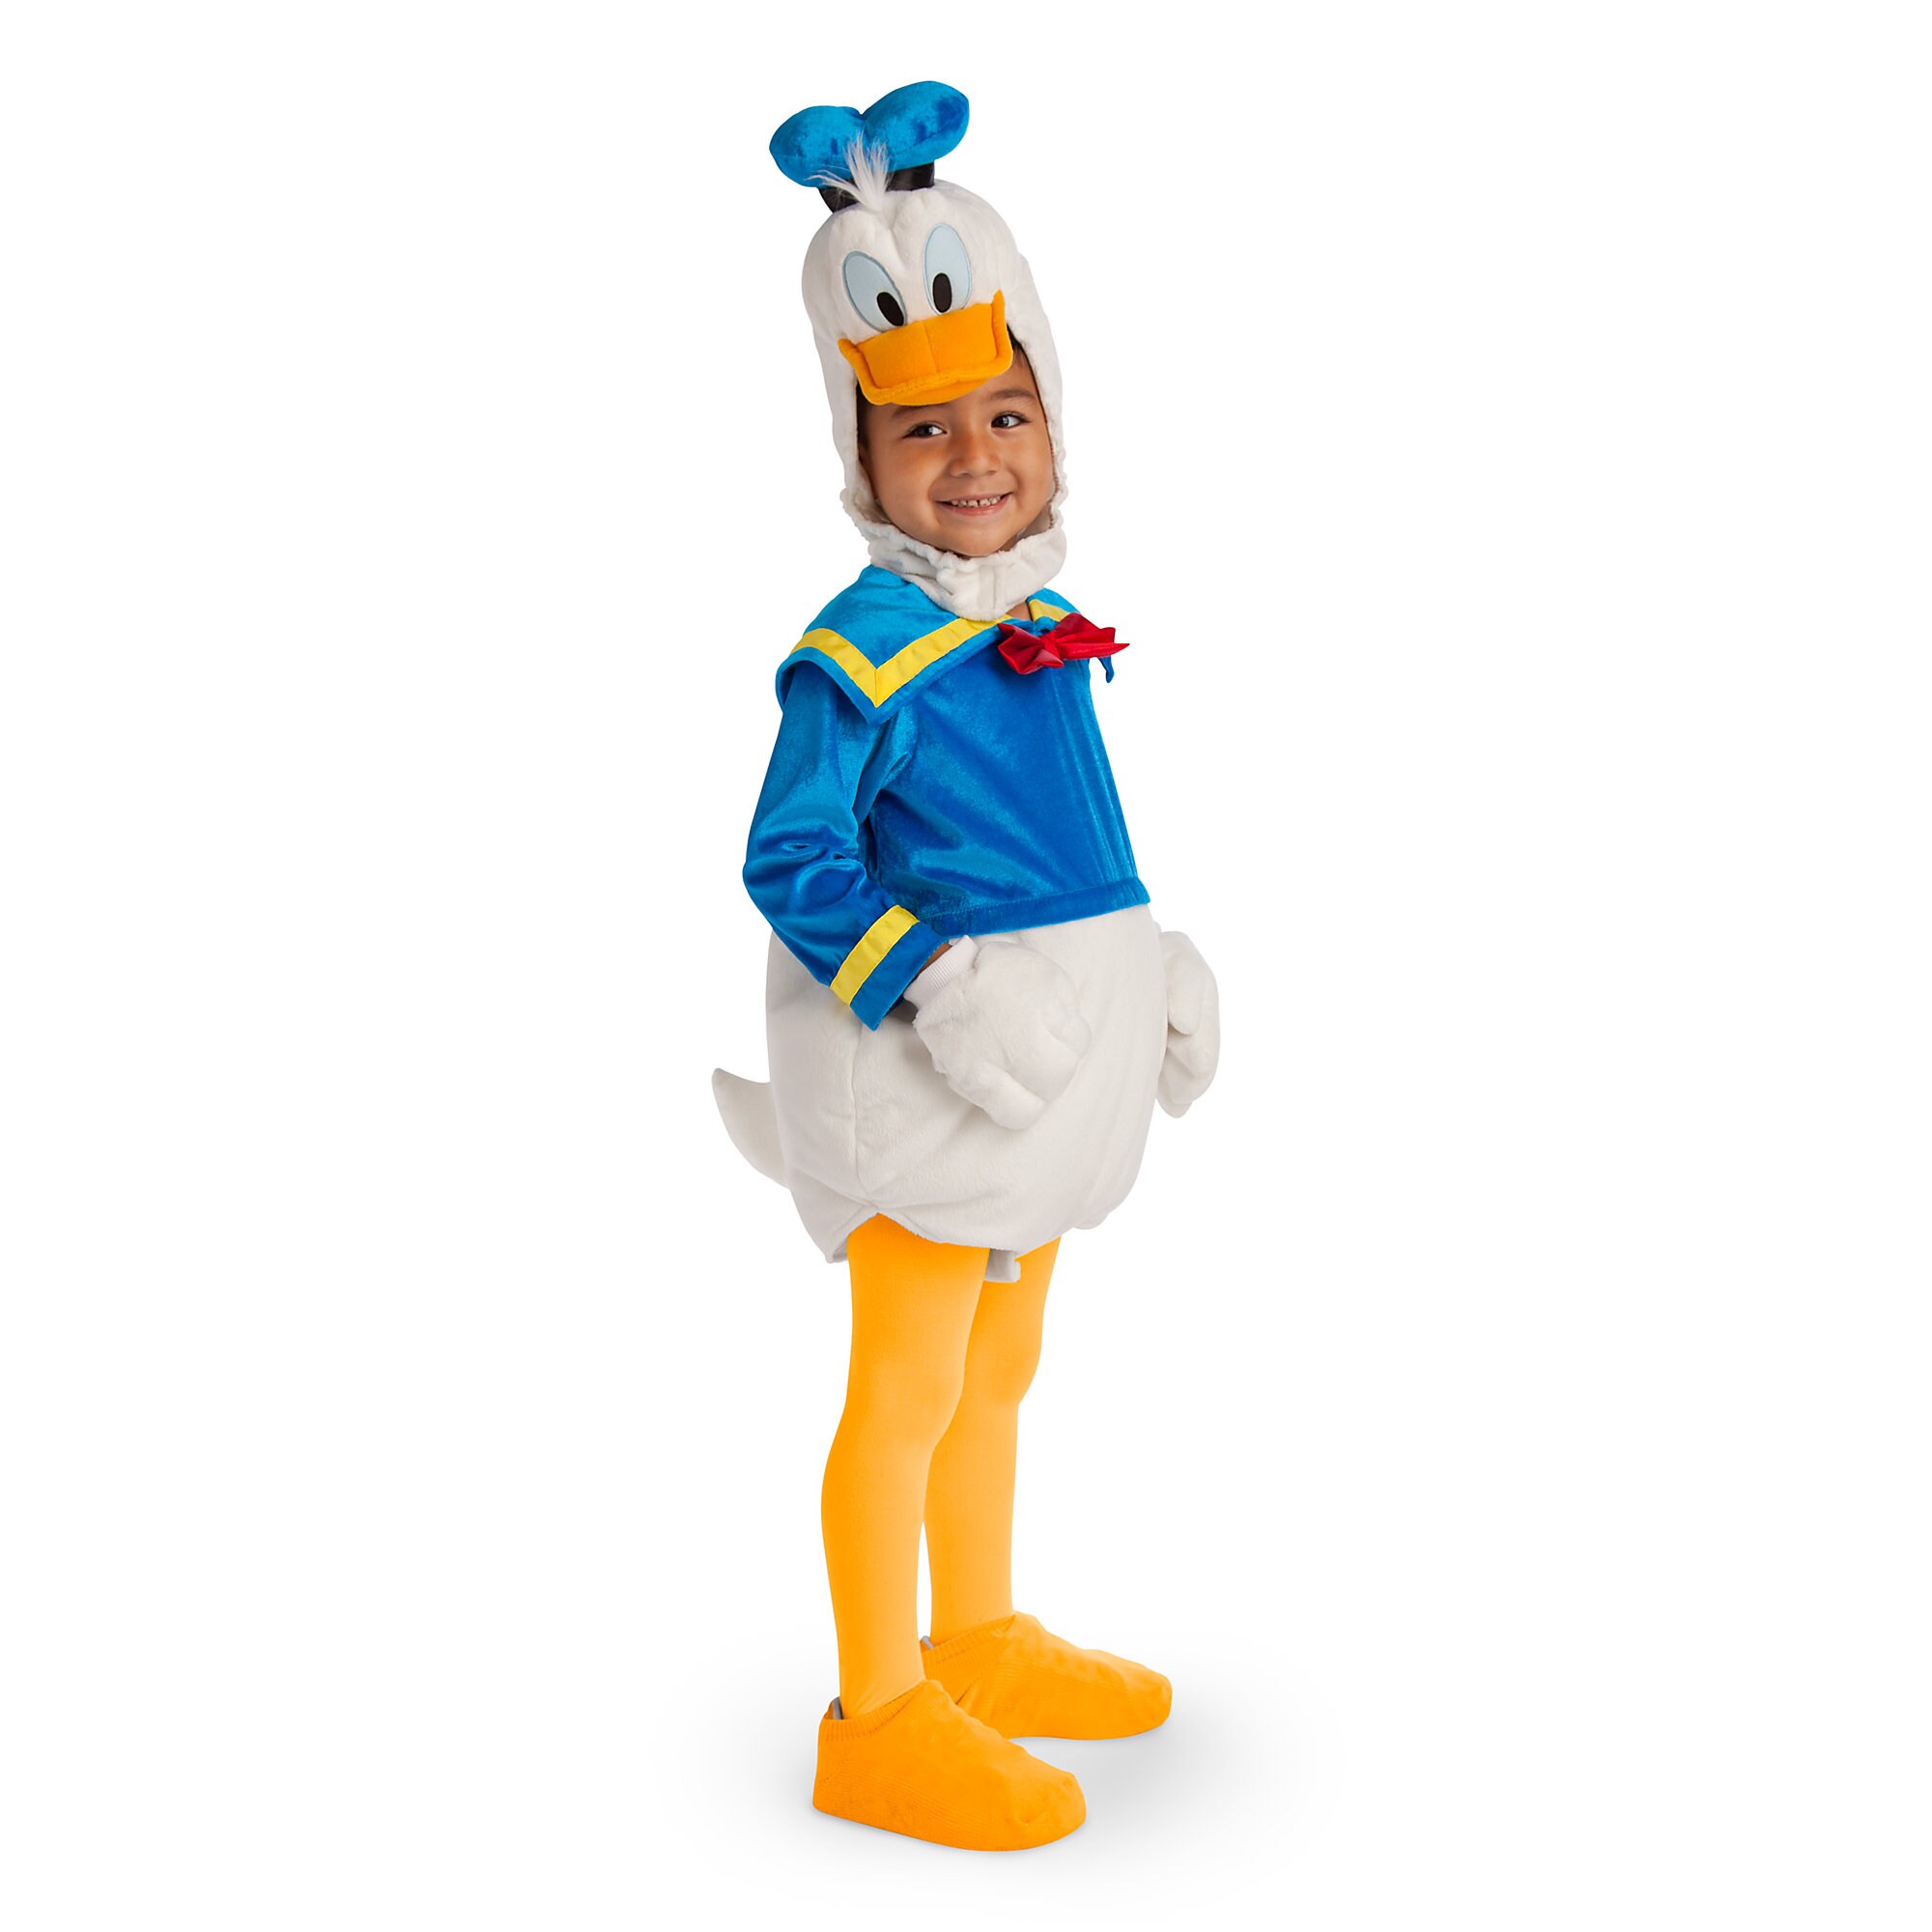 Donald Duck Costume for Baby now out for purchase.